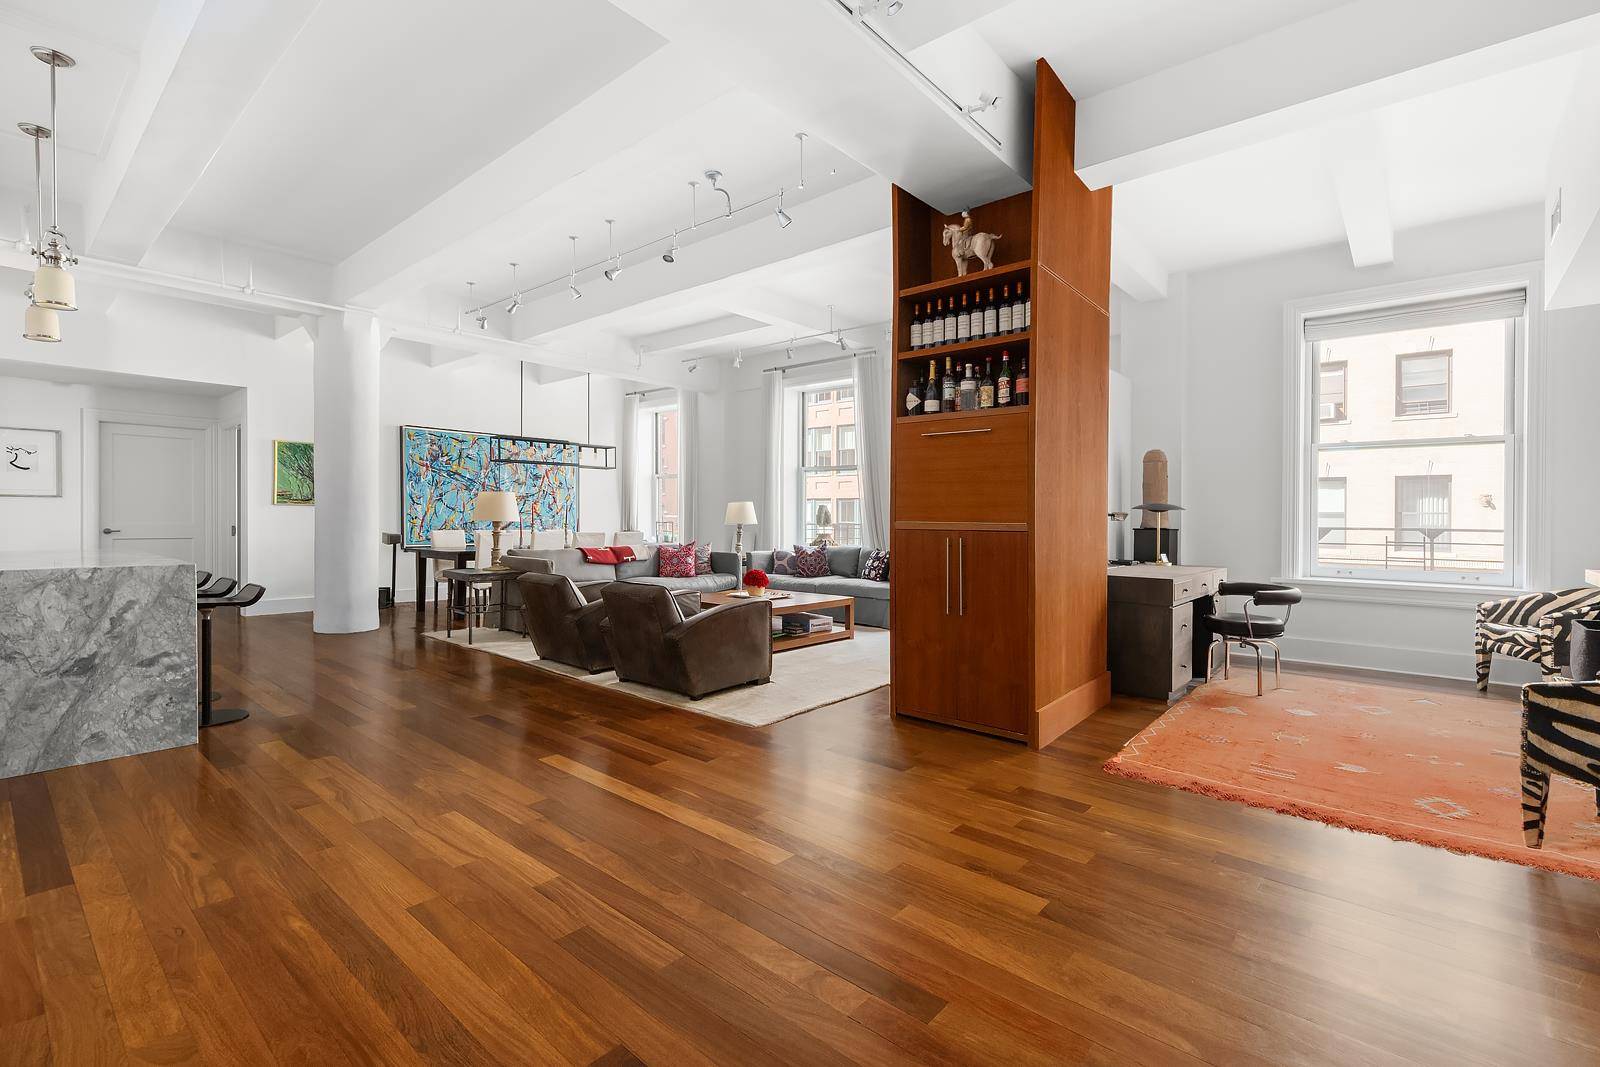 The Eklund Gomes Team is presenting a meticulously renovated, triple mint 2, 400 square feet, three bedroom, two and a half bathroom loft in the heart of Tribeca.